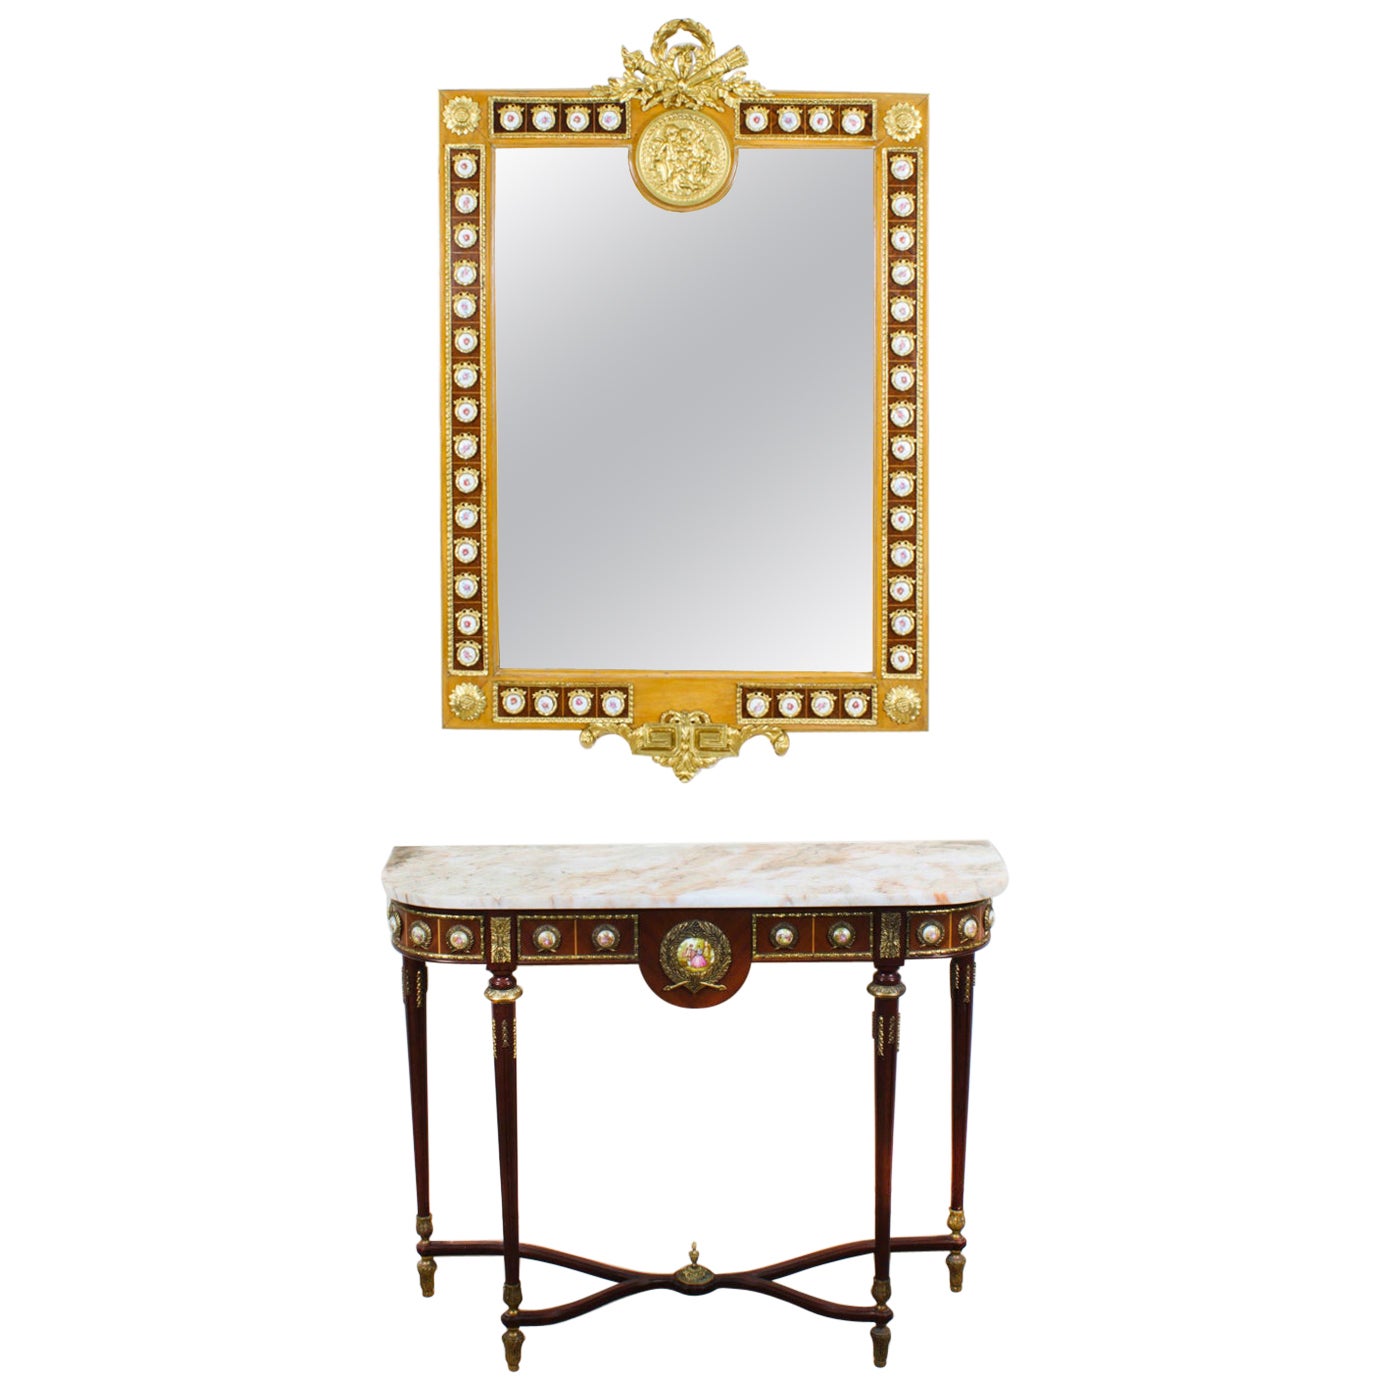 Vintage Ormolu & Porcelain Mounted Console Table & Mirror 20th C